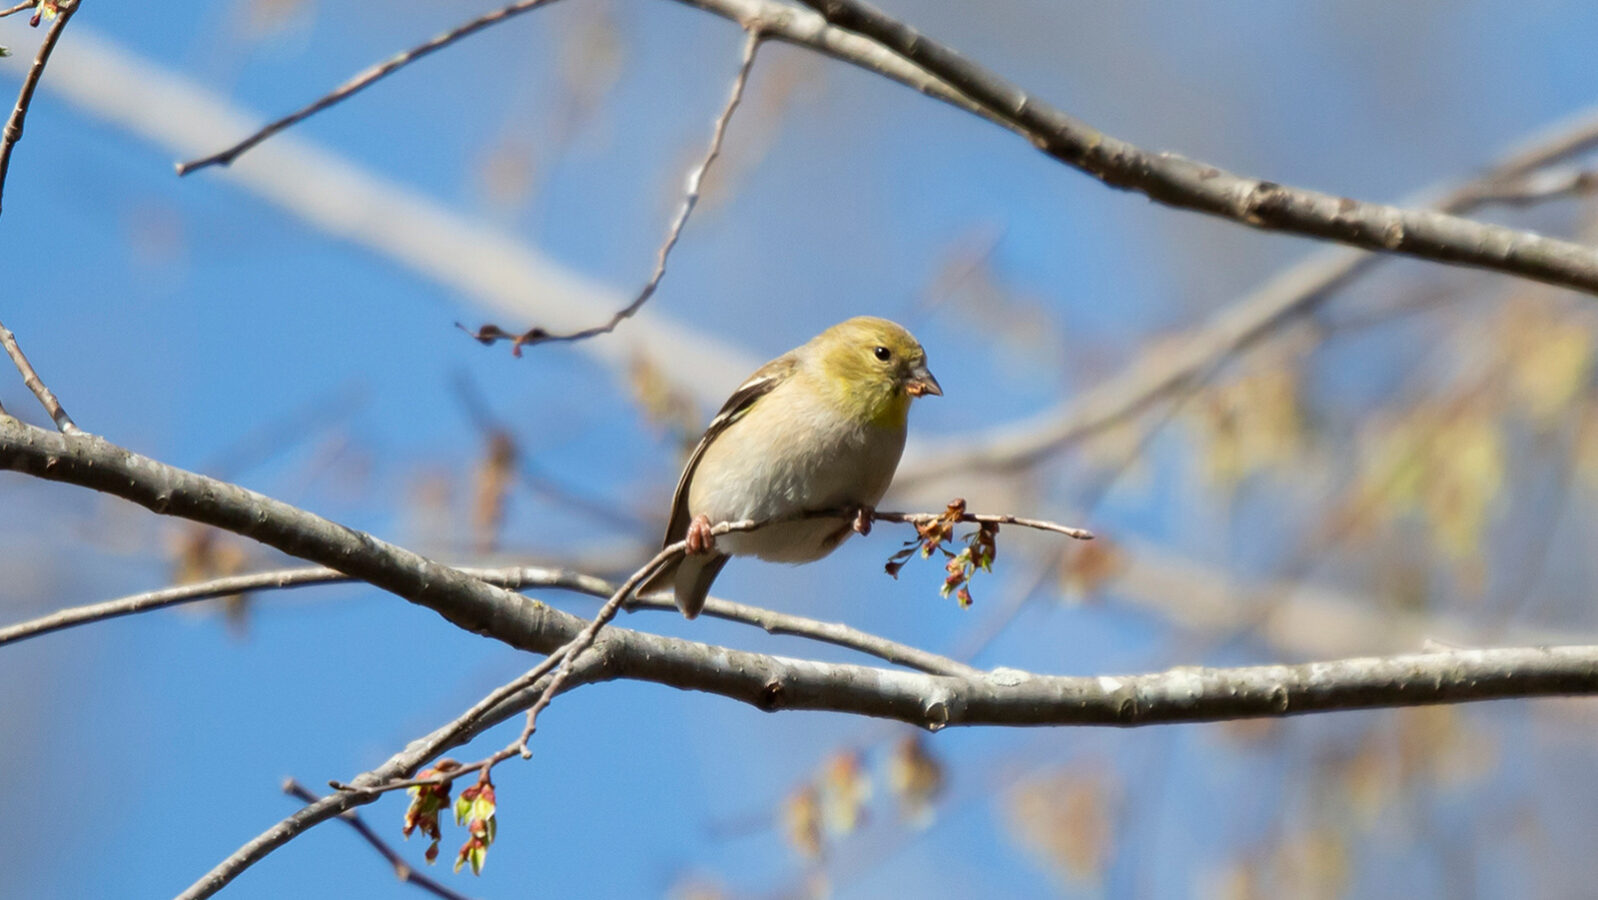 American goldfinch perched on a branch